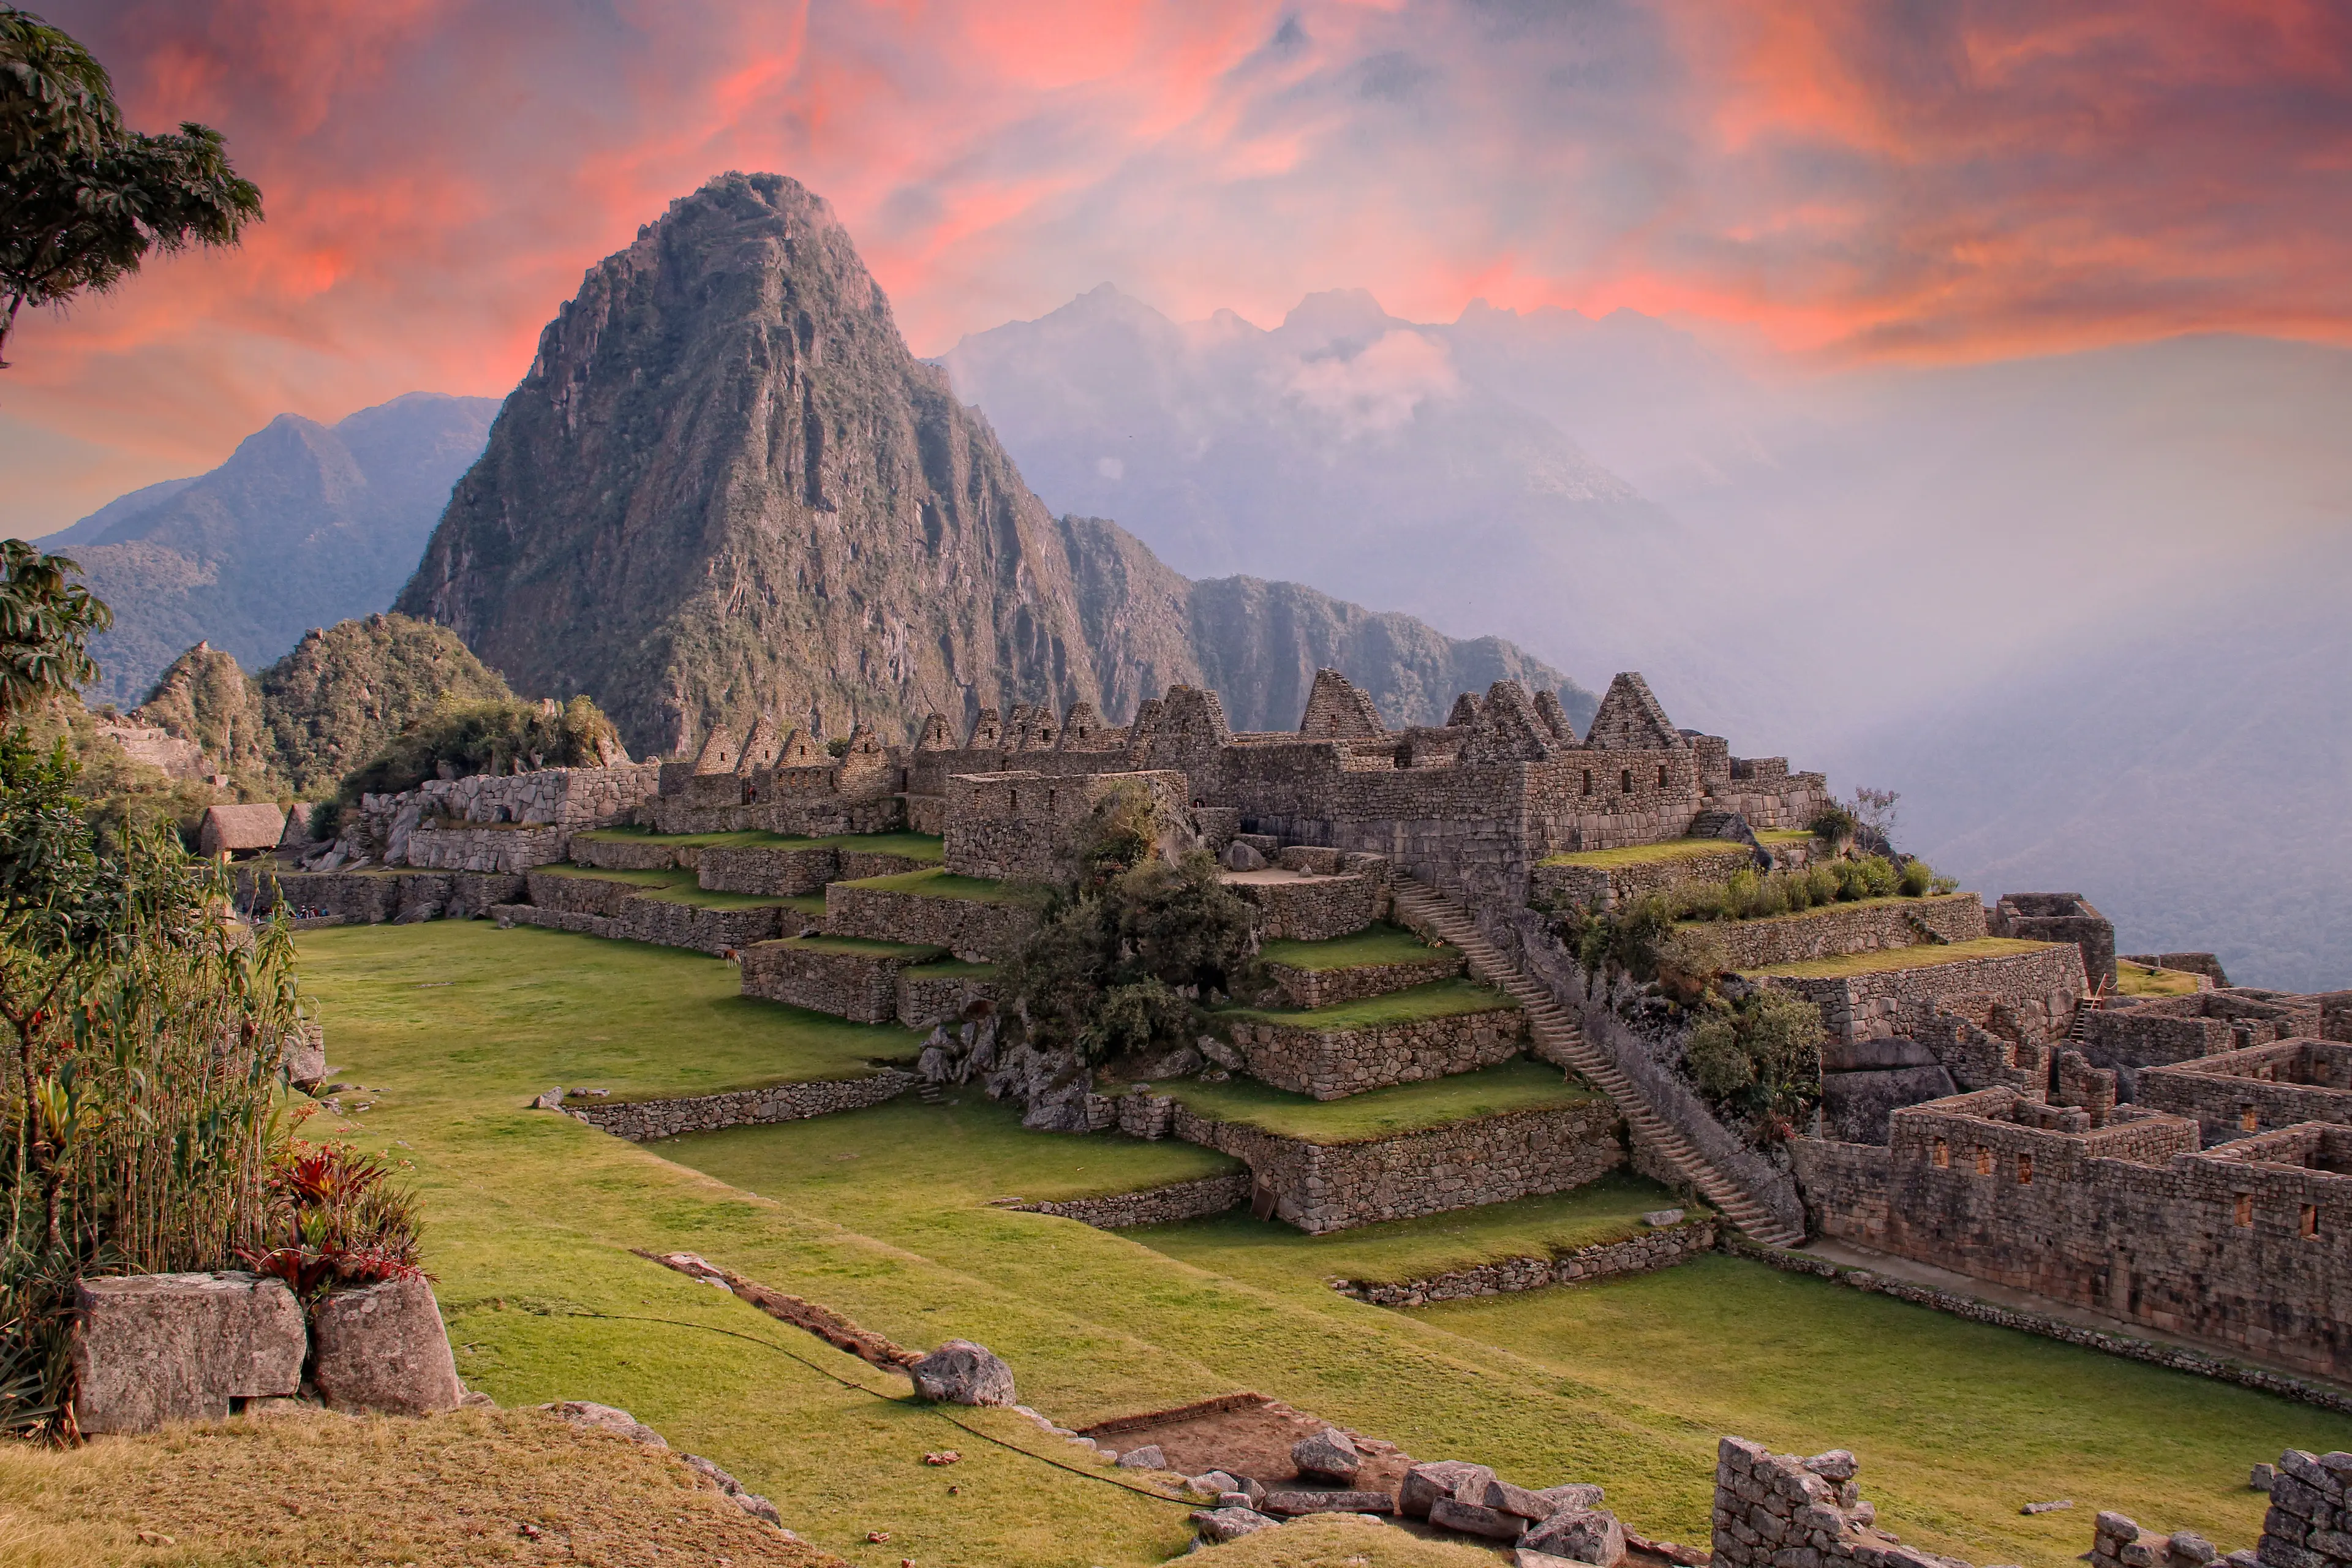 1-Day Adventure with Friends: Unexplored Machu Picchu Outdoors